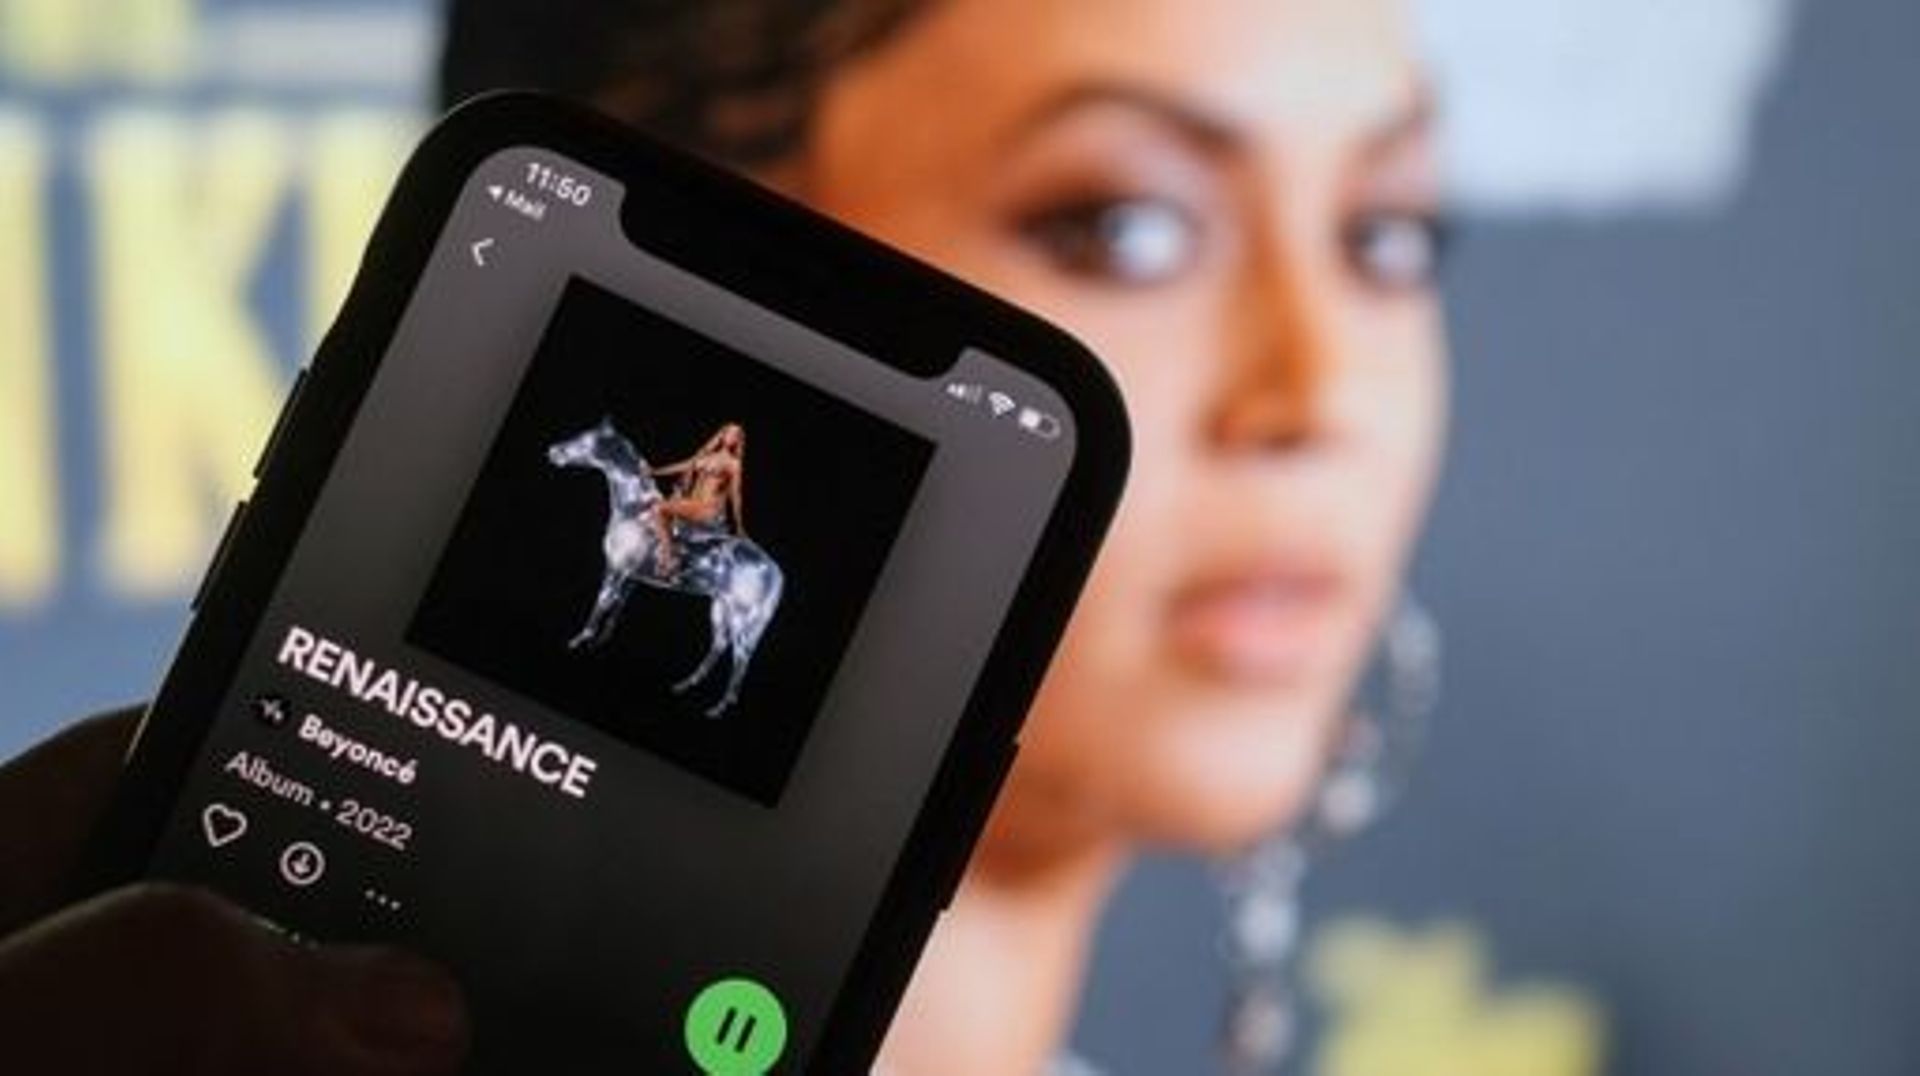 In this illustration photo taken July 28, 2022 in Los Angeles, Beyonce's new album "Renaissance" is playing on a smartphone with a picture of the singer in the background. Beyonce, the paradigm-shifting music royal whose art has long established her as on